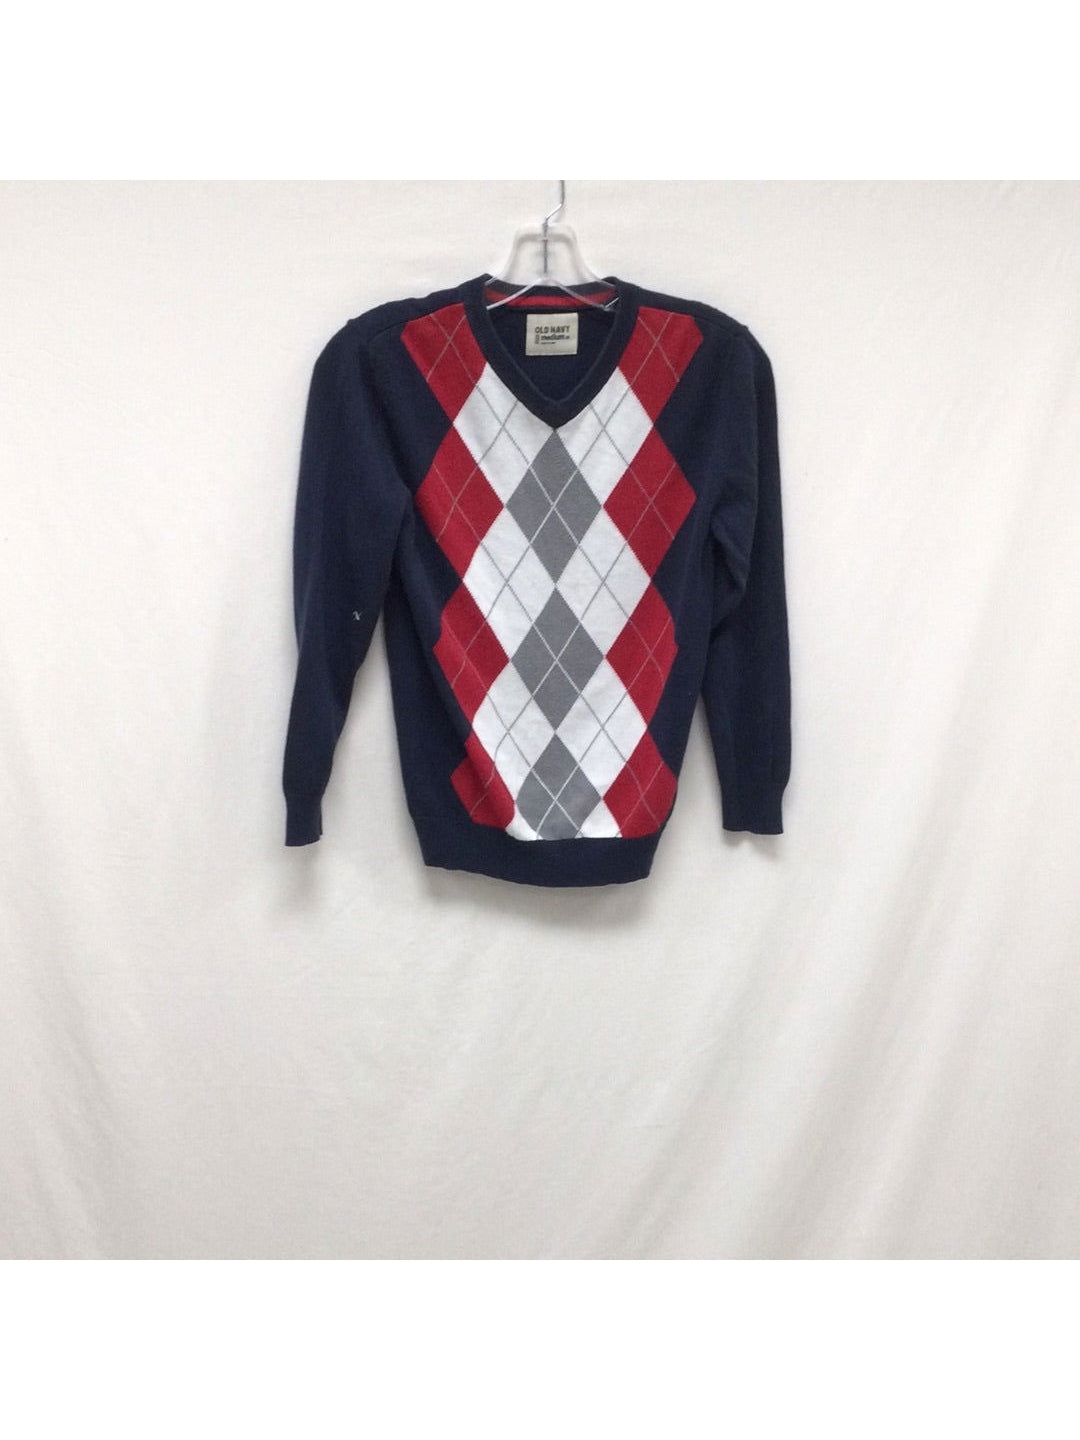 Old Navy Boy Multi Color Sweater Size Medium (8) - The Kennedy Collective Thrift - 